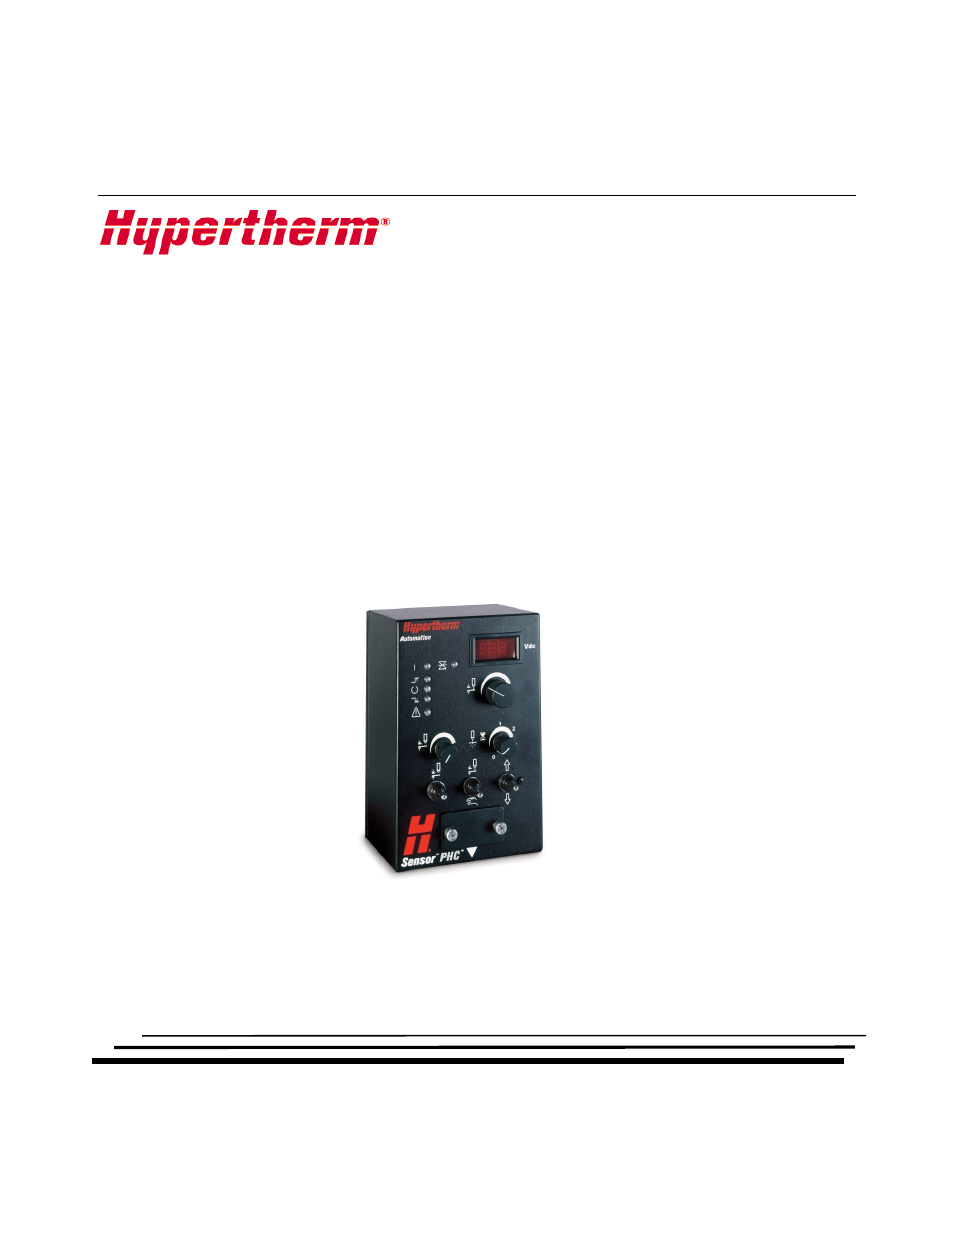 Hypertherm PHC Sensor User Manual | 58 pages